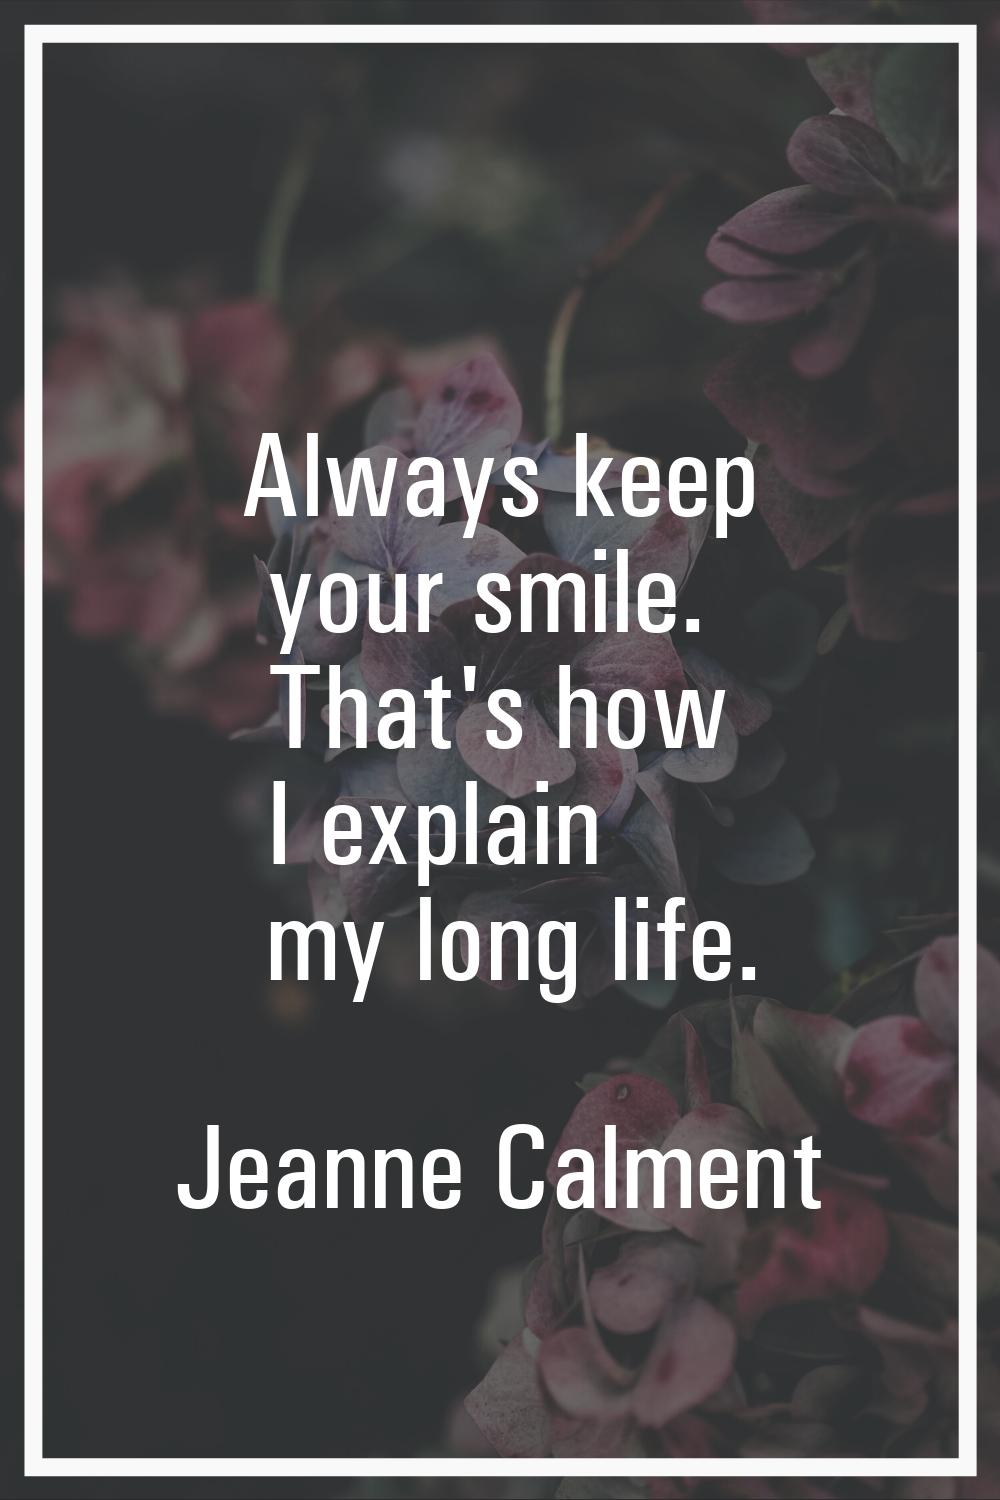 Always keep your smile. That's how I explain my long life.